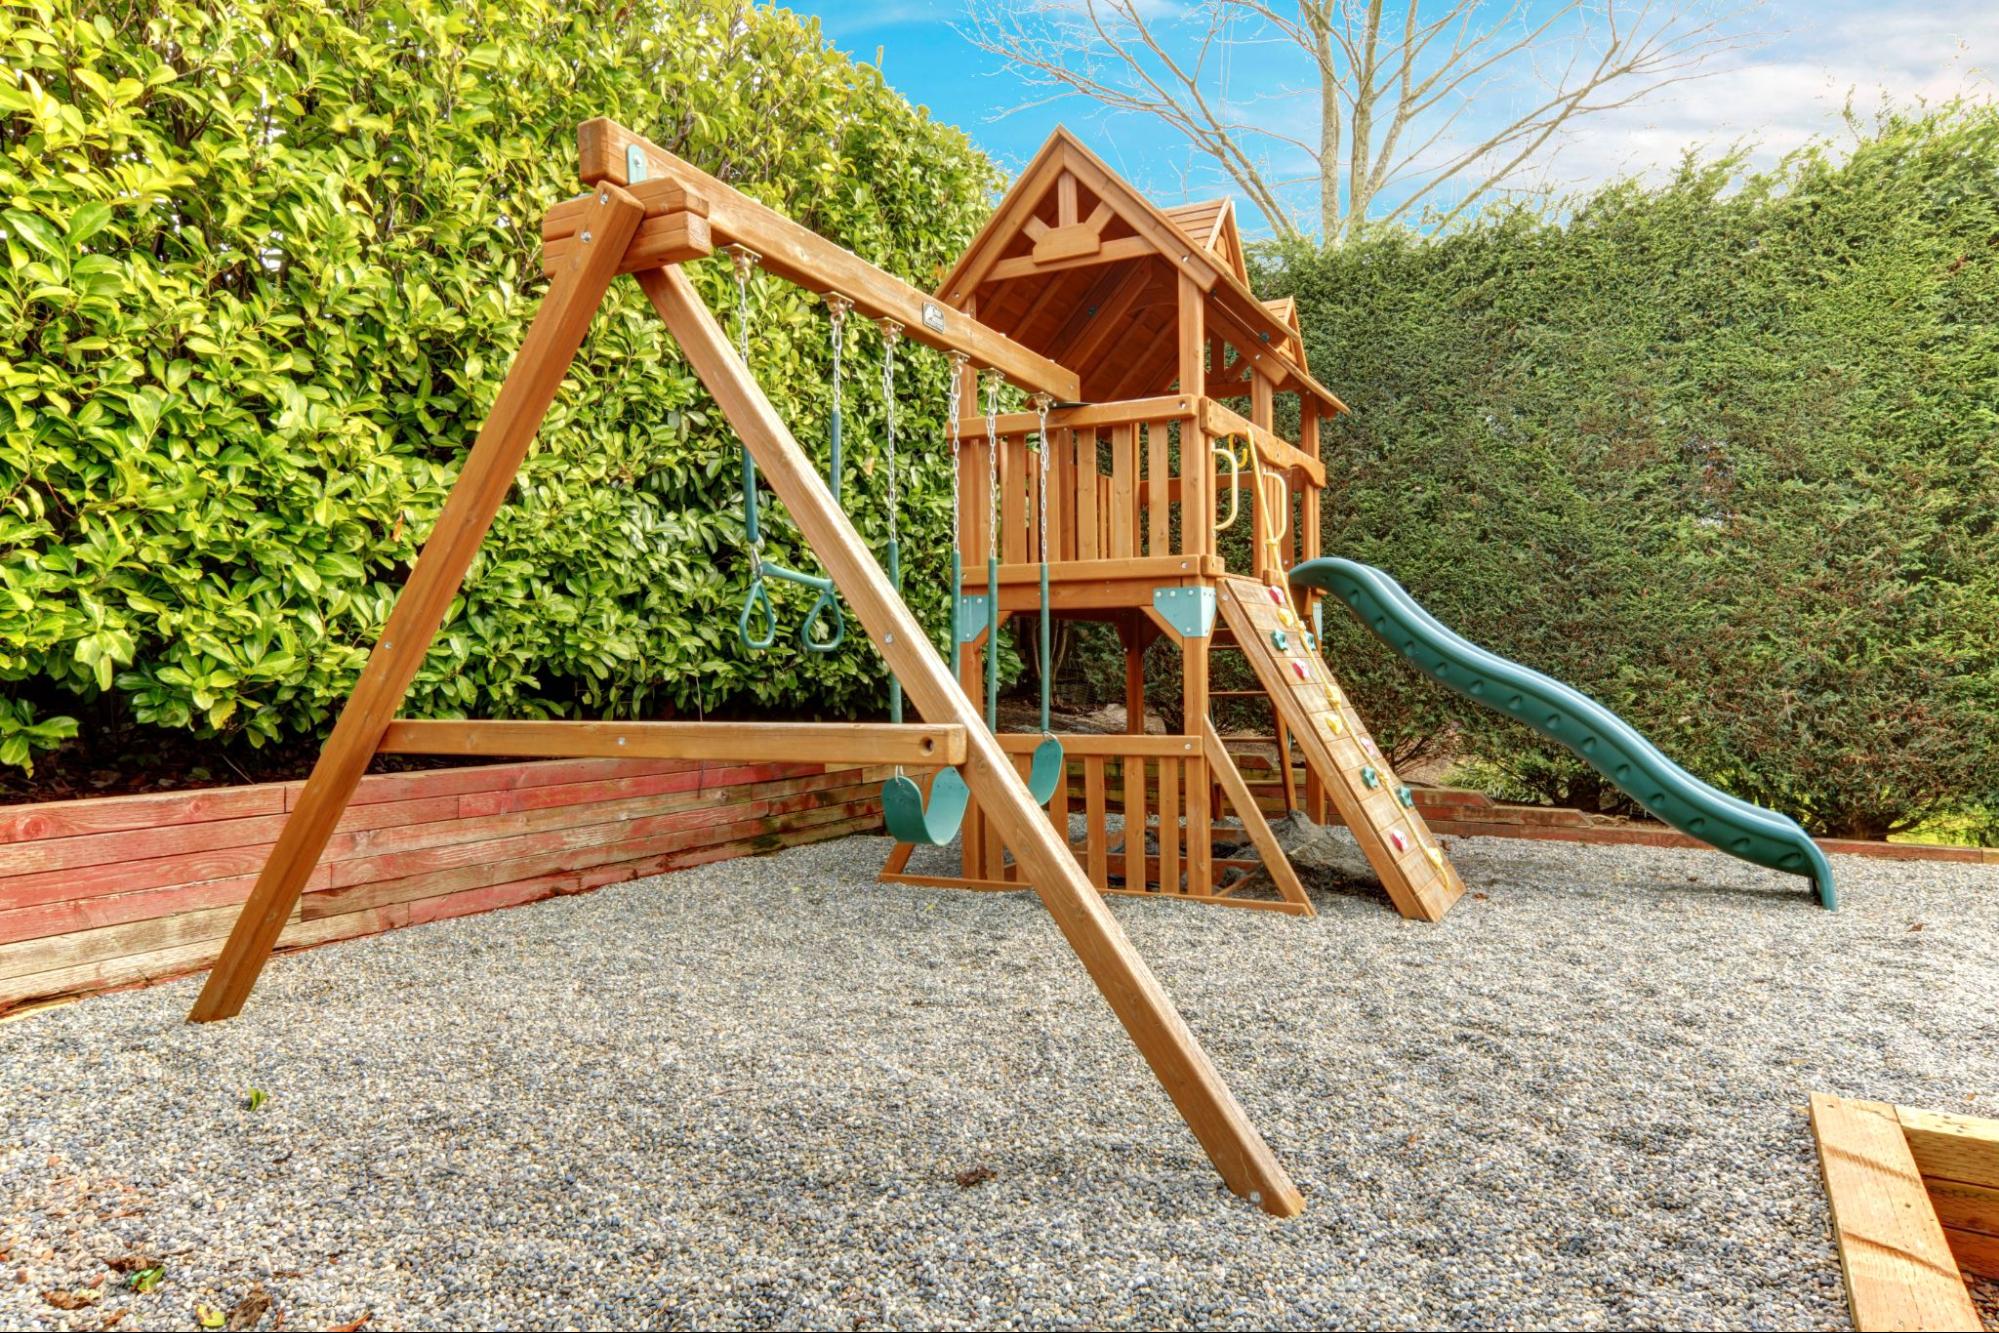 Even backyard playgrounds should have playground insurance.